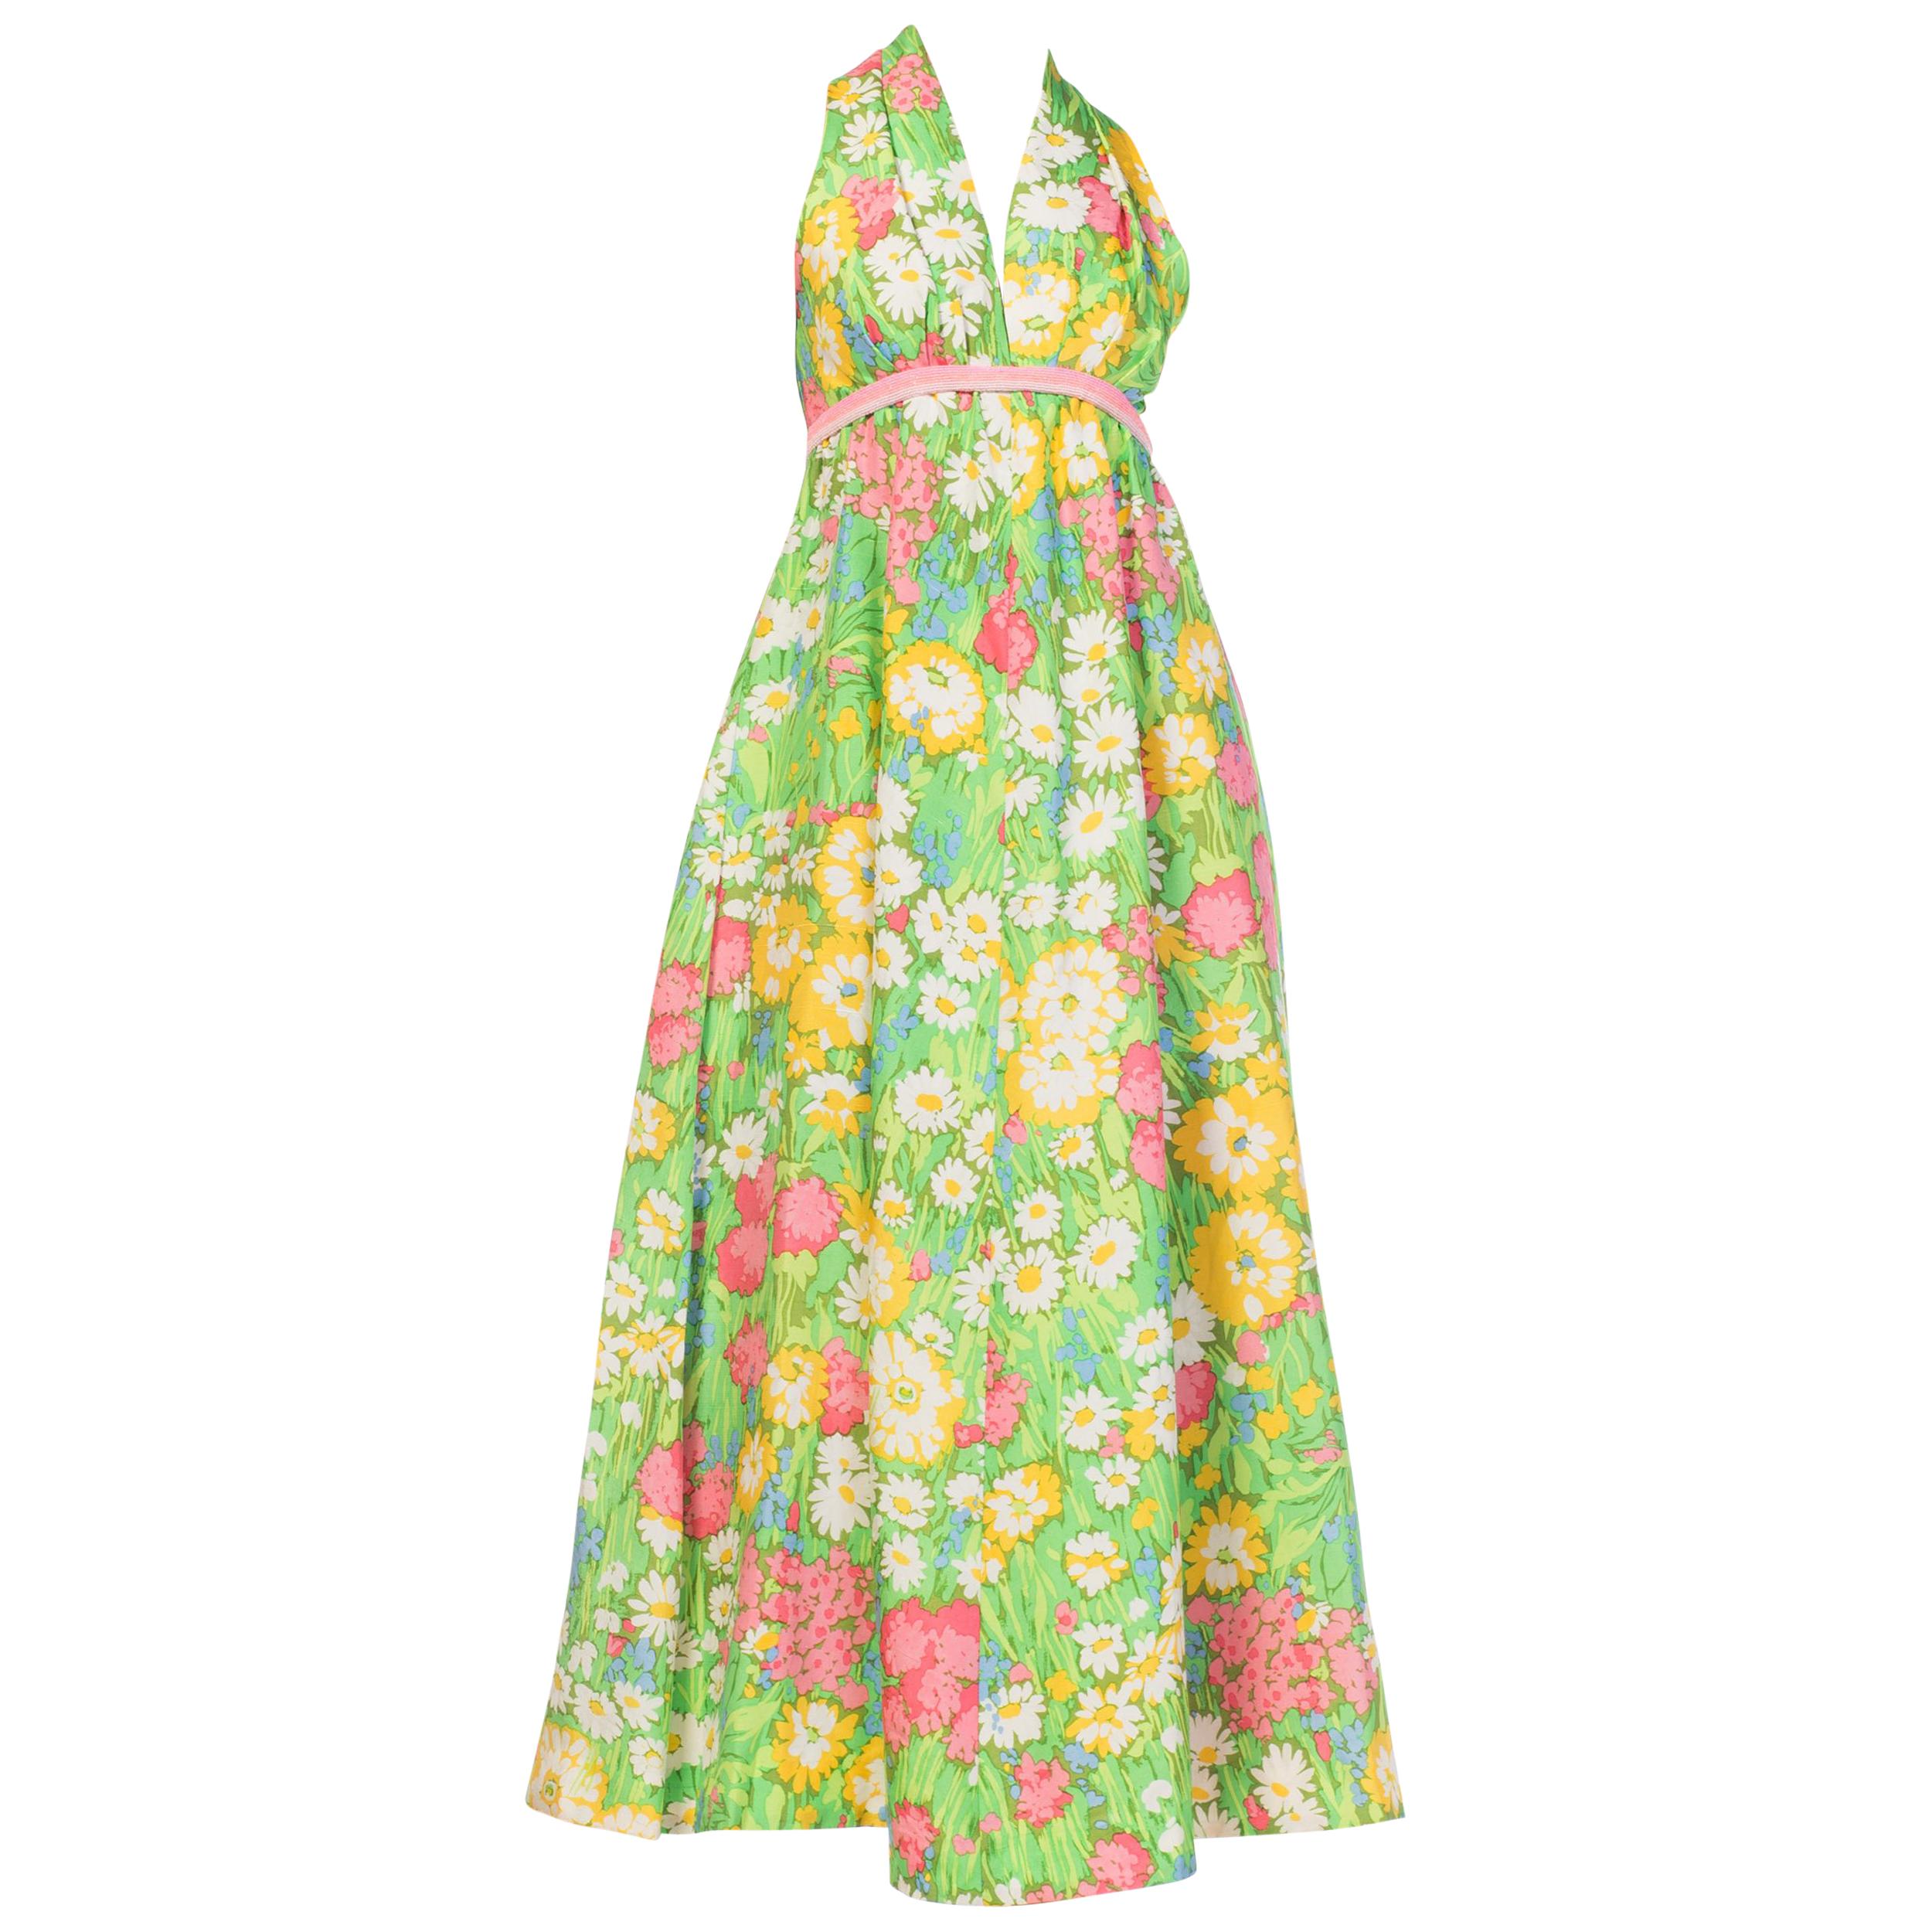 1960s 1970s Floral Printed Silk Halter Dress with Beading